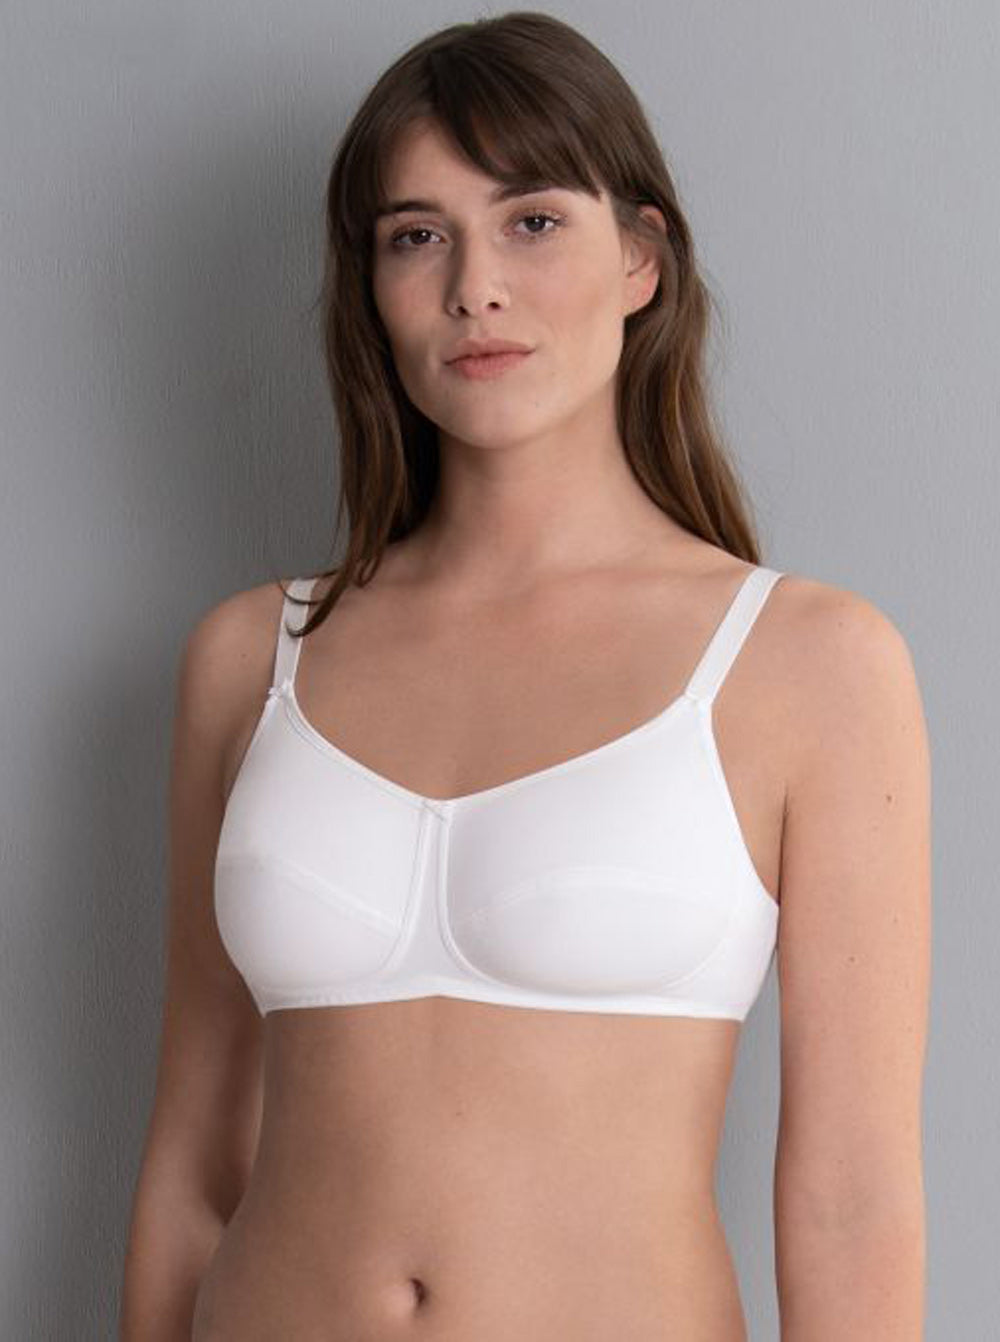 X9017 Adult Mastectomy Bras Beauty Unmarked Breast Special Bra